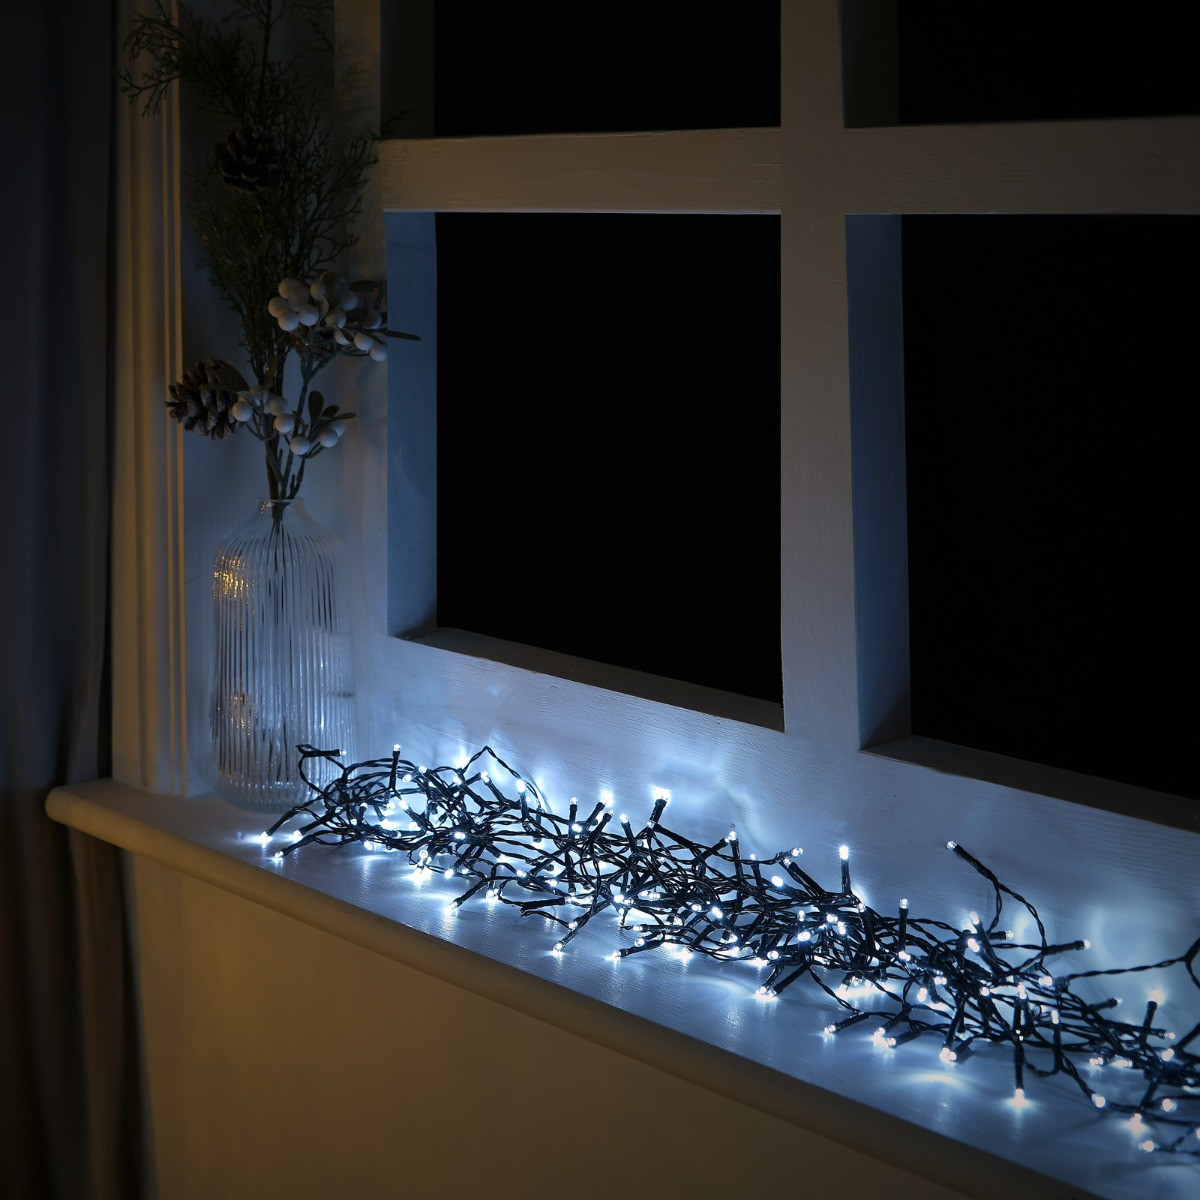 200 Indoor/Outdoor Battery Operated LED String Lights - Cold White>